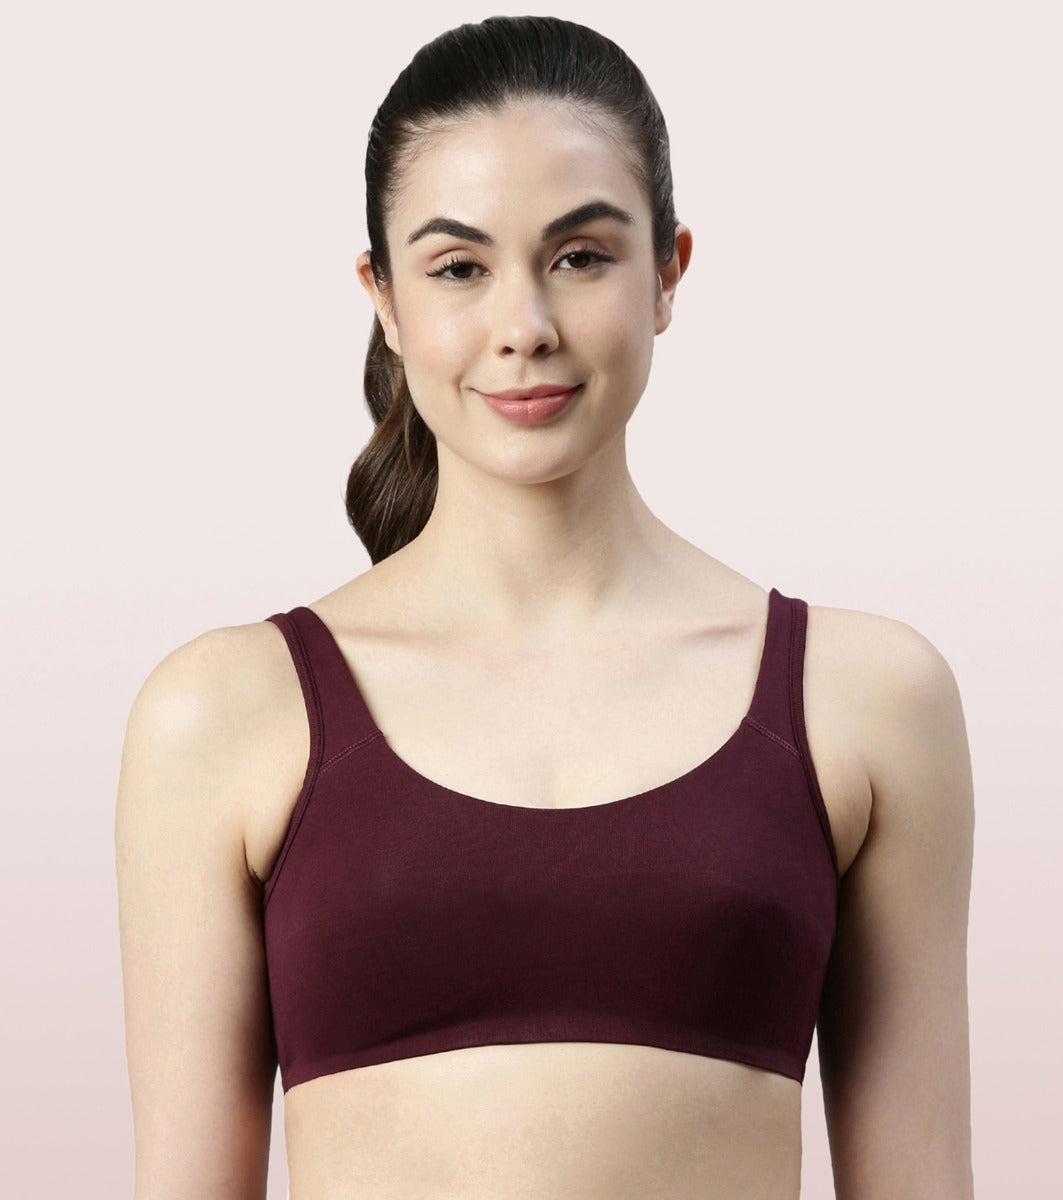 Enamor SB04 High Impact Sports Bra - Racer Back Non-Padded Wirefree - Blue  34D in Mumbai at best price by Sagar Garments - Justdial